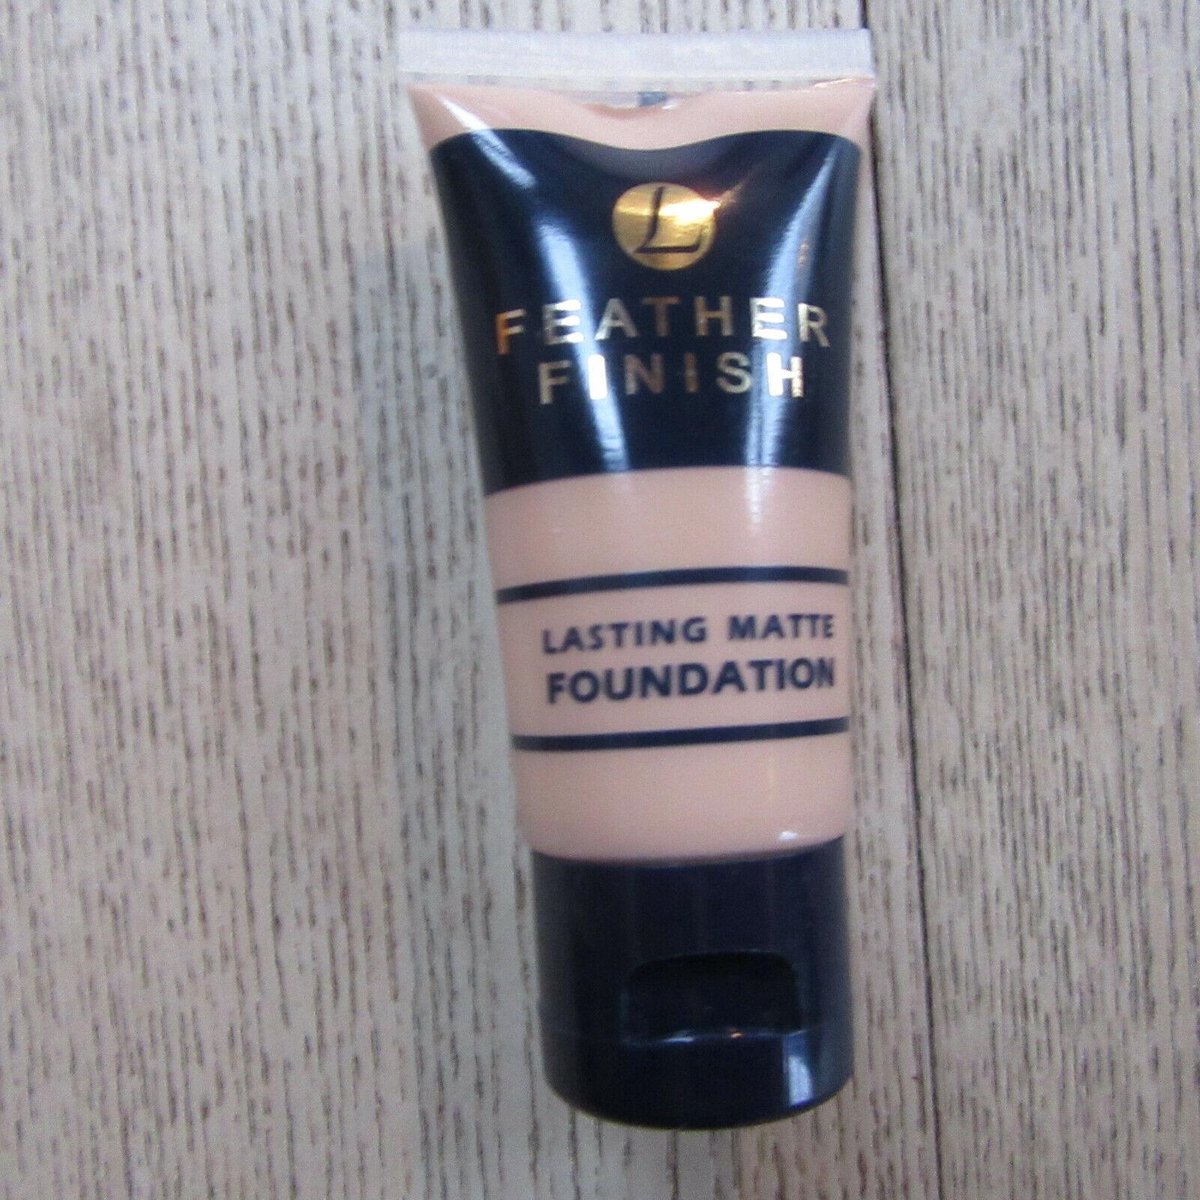 Lentheric Lentheric Feather Finish Lasting Matte Foundation 30ml - Natural Beige